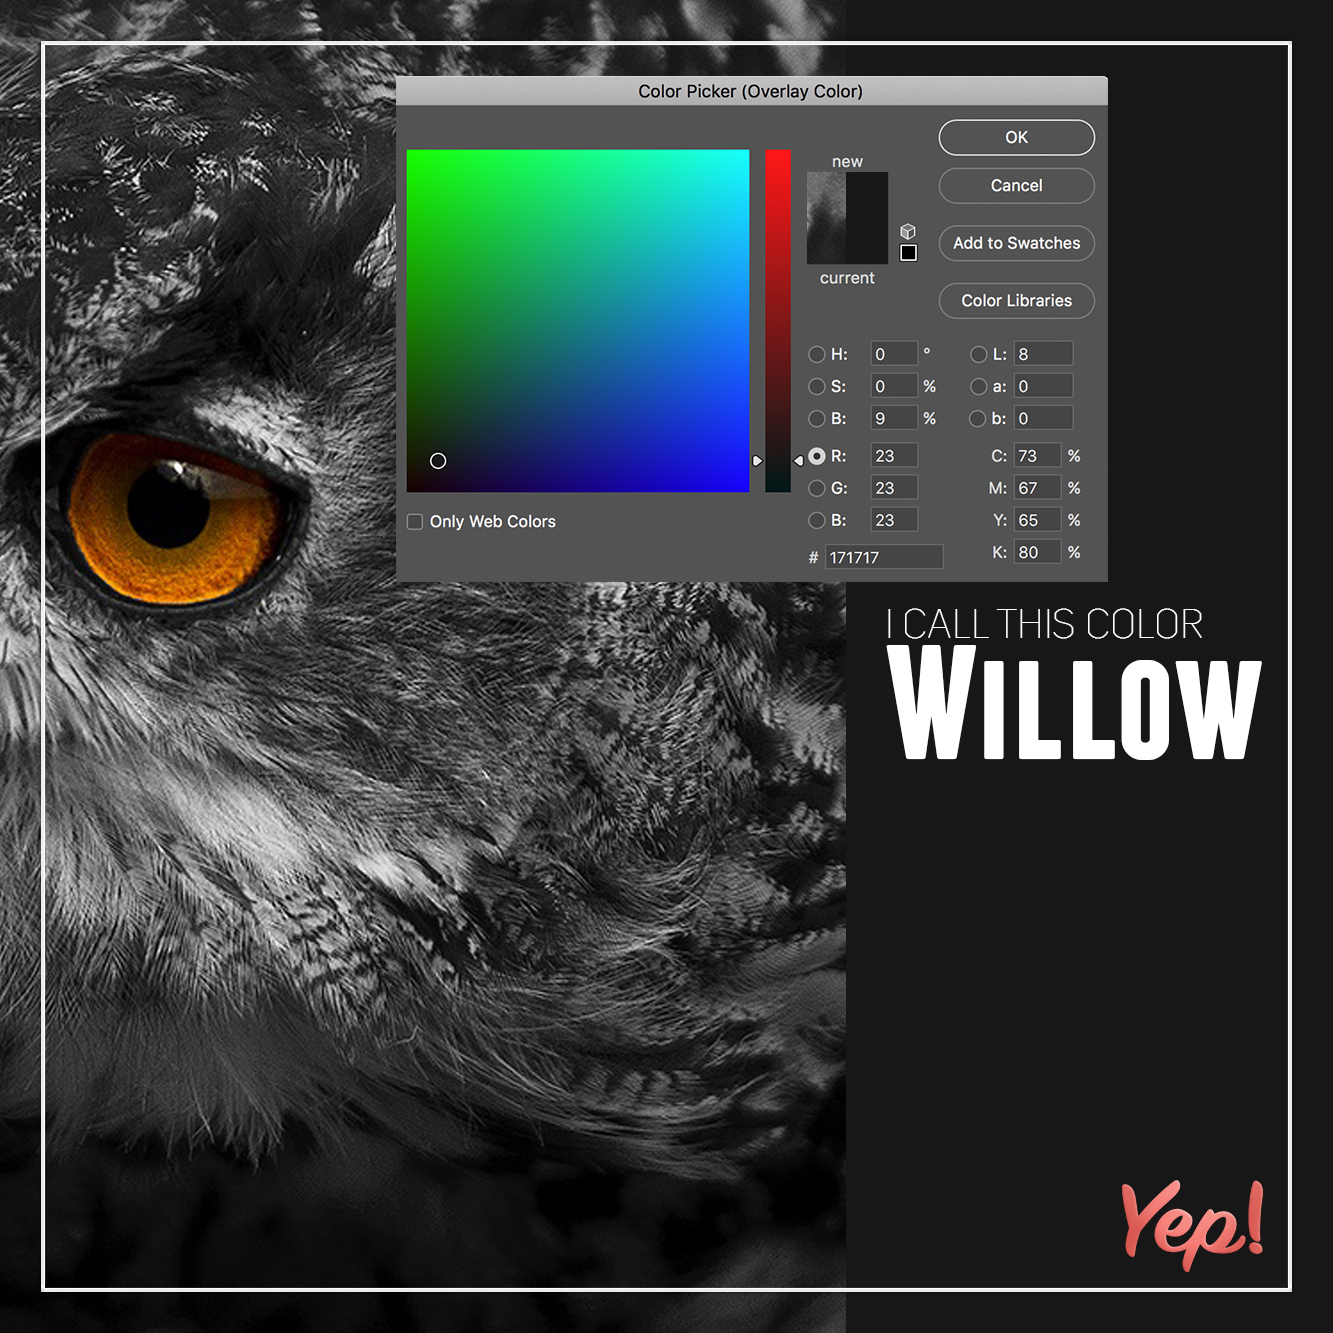 animal avian beak - Color Bicker Overlay Color Ok Cancel Add to Swelches current Color Libraries Lb Soco Or 23 C3 X 23 Mb 23 Yog 17110 Only Web Color I Call This Color Willow Yep!